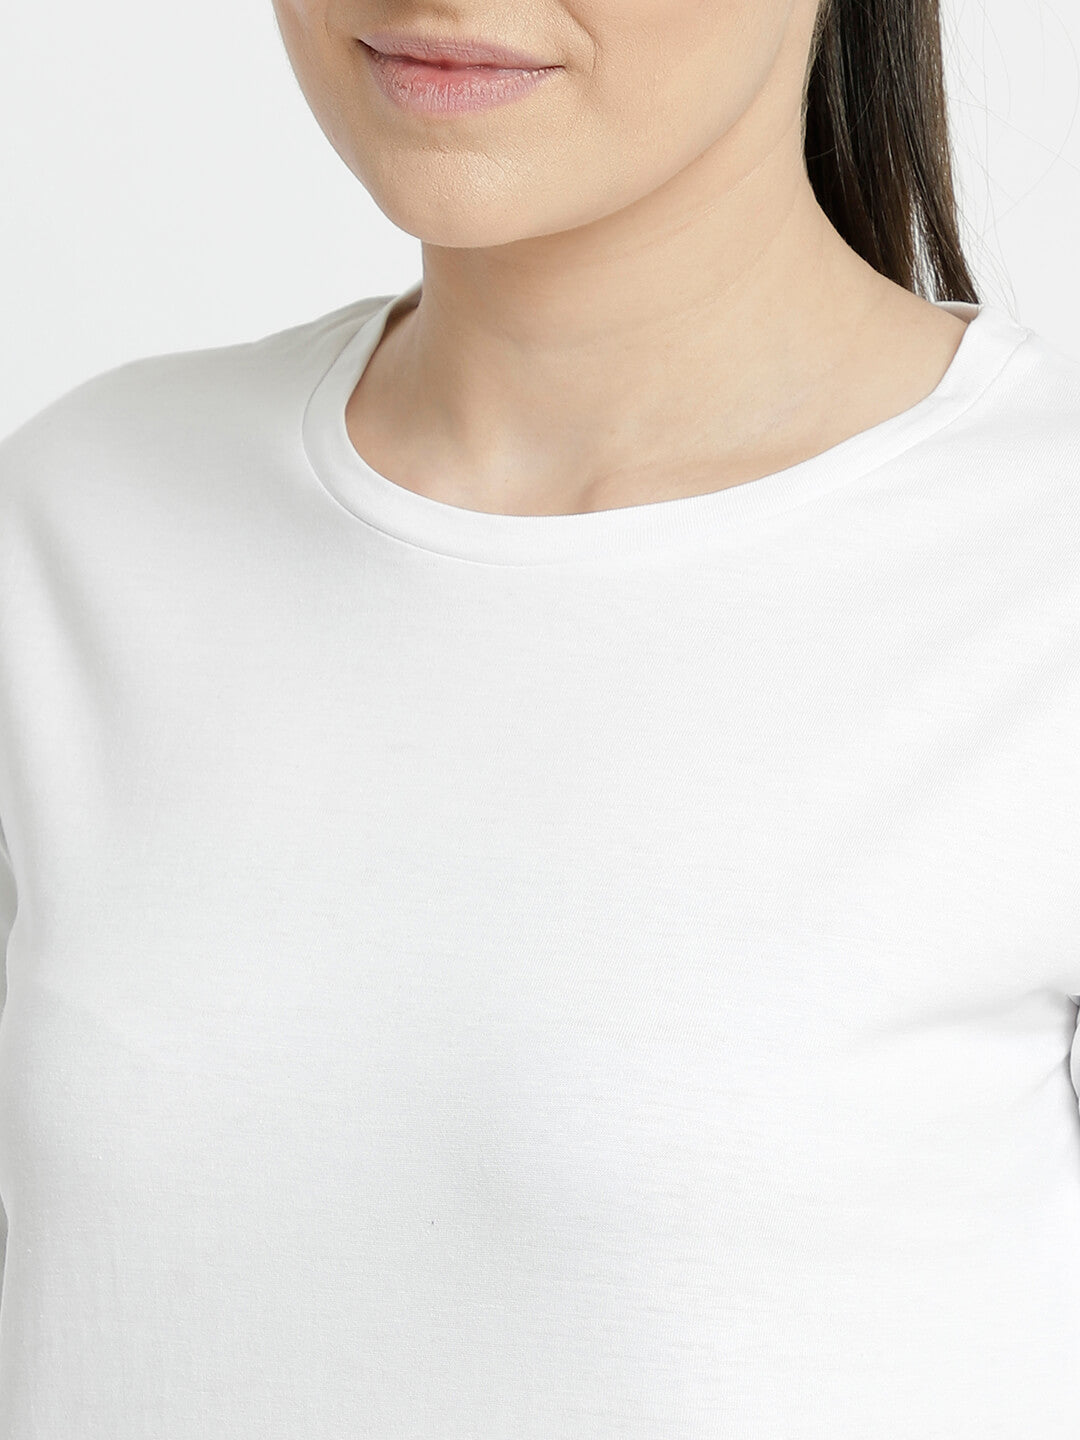 Tany Round Neck White T-Shirt for Women